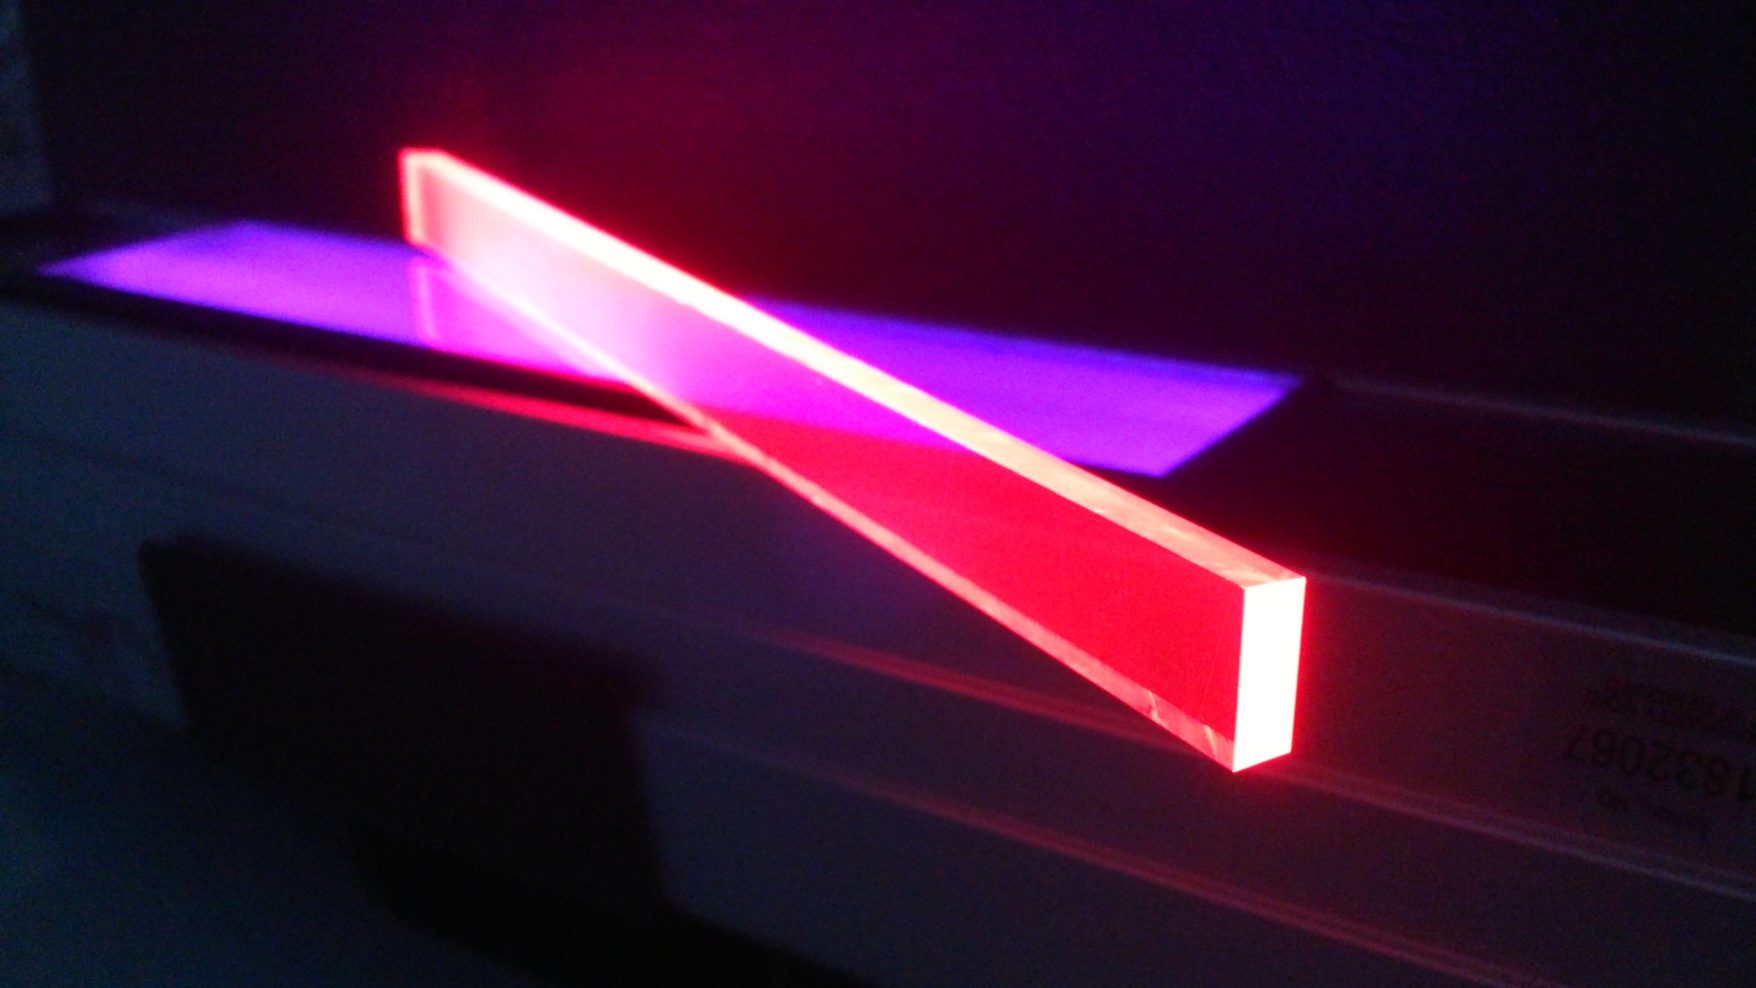 Abstract image of glowing acrylic pieces in red and purple contrasting against a black background